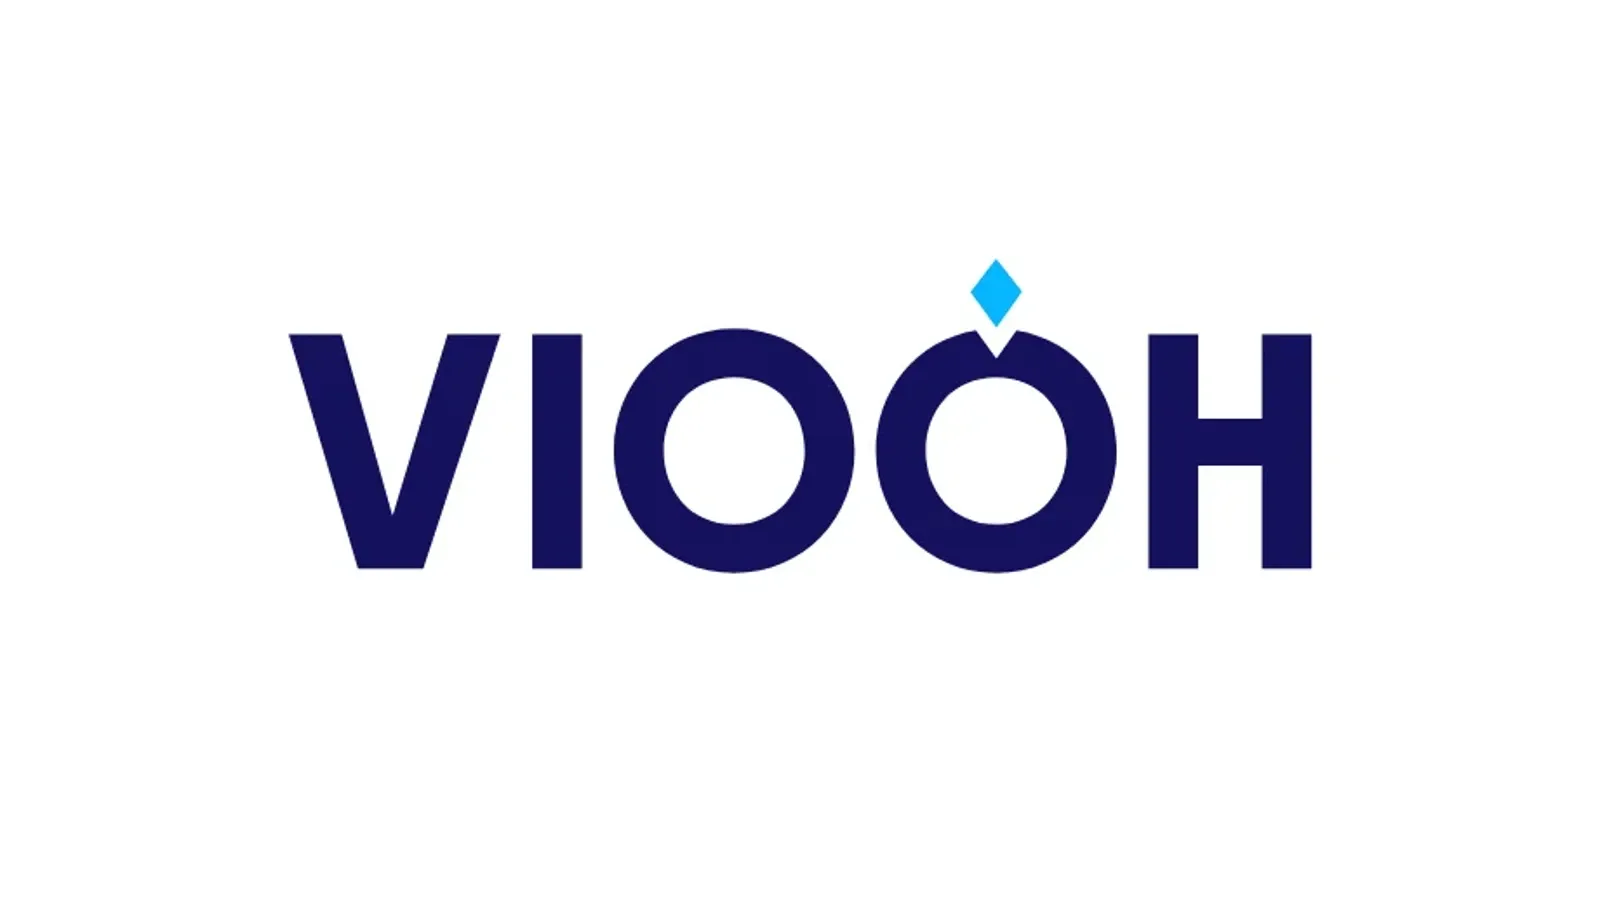 VIOOH recognized again as a Top Workplace for employee satisfaction and culture